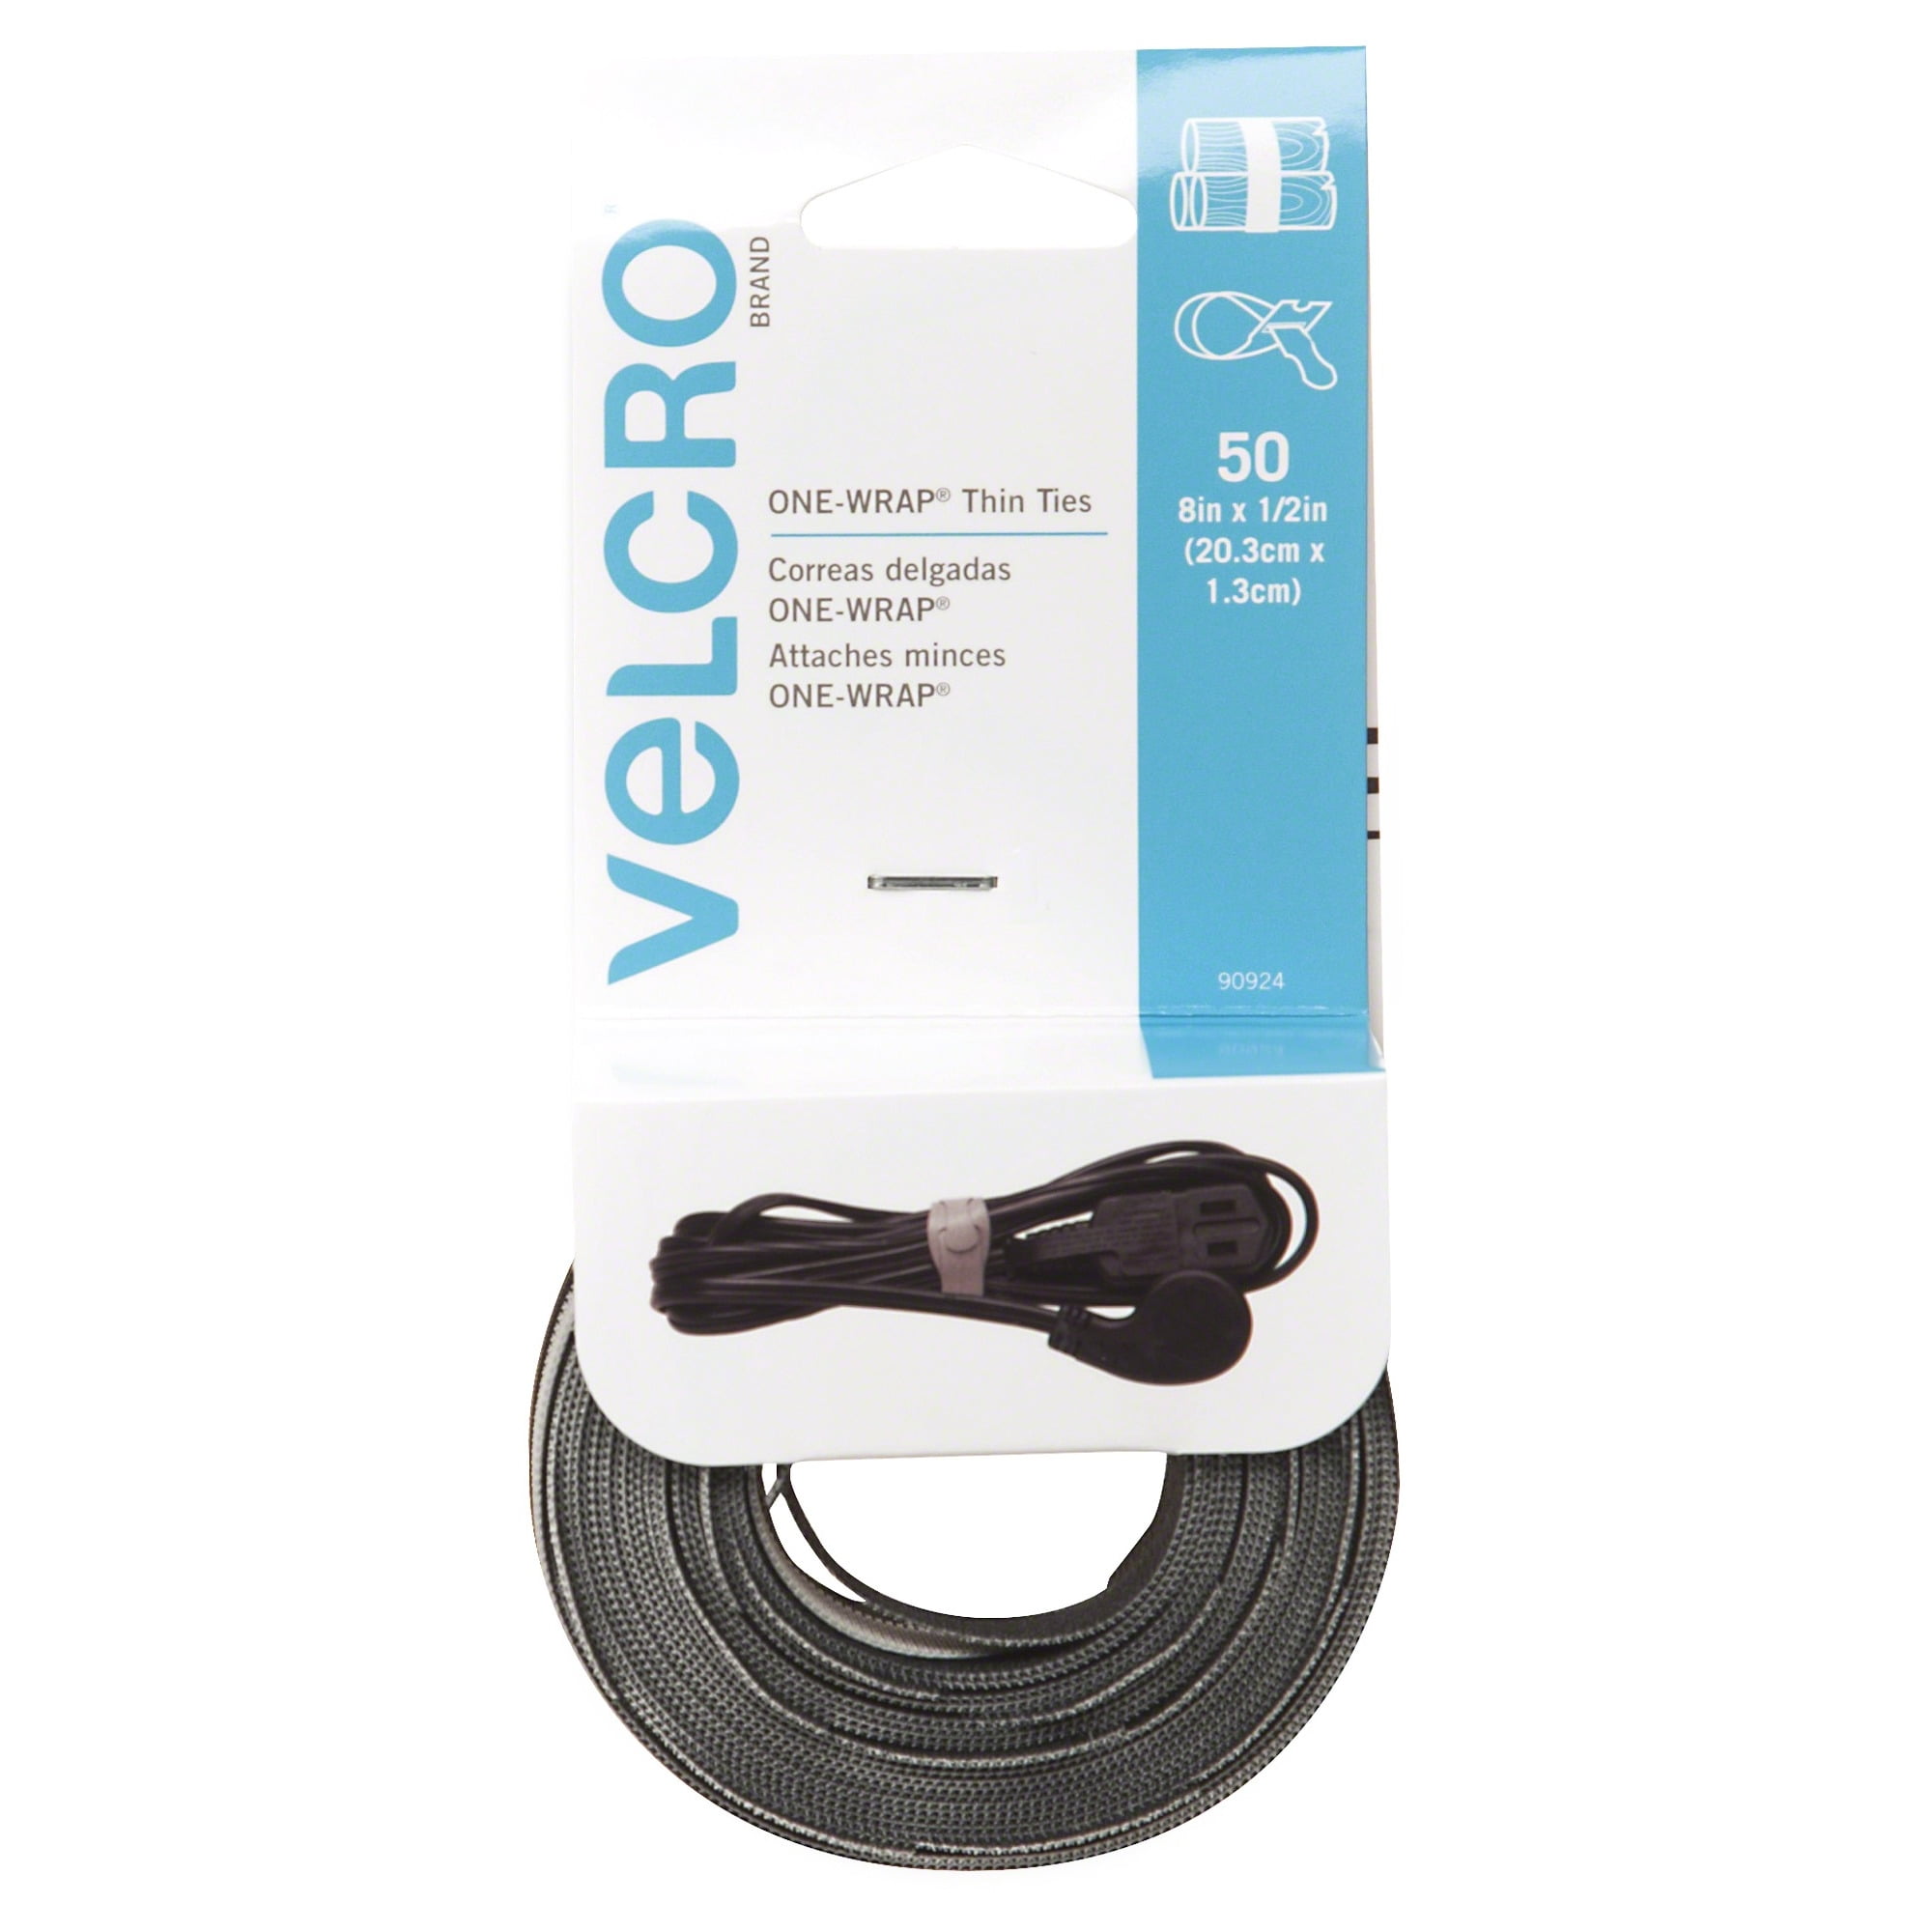 VELCROBrand ONE-WRAP Cable Management,Reusable,LightDuty 8"x1/2"Ties,Black/Gray 